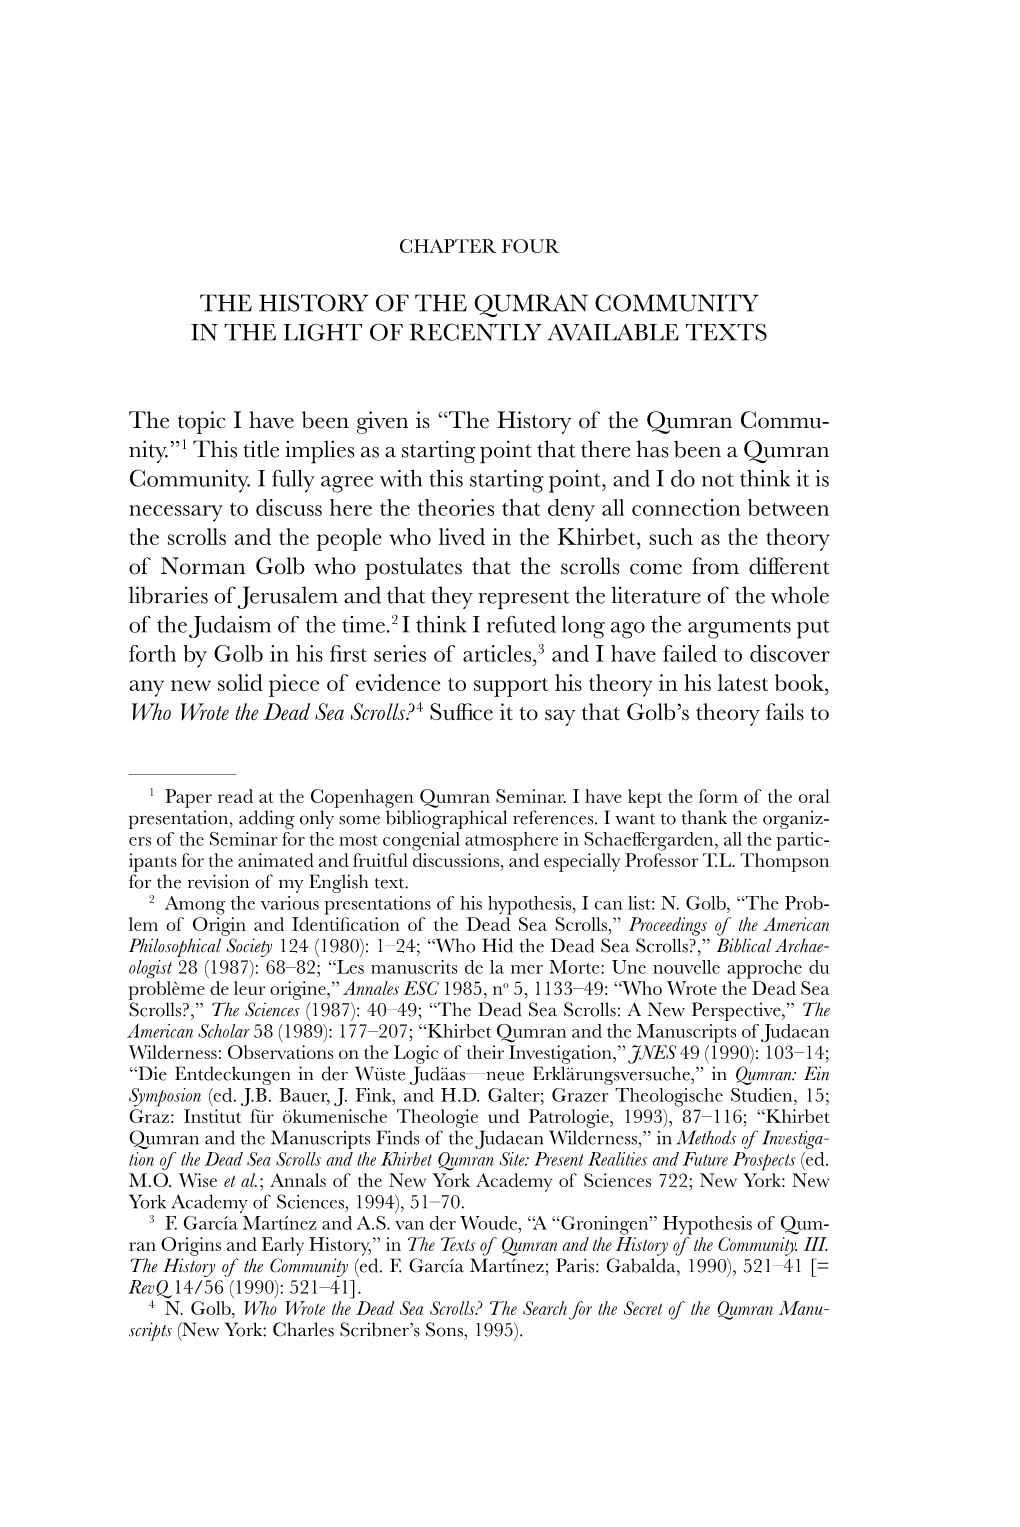 The History of the Qumran Community in the Light of Recently Available Texts